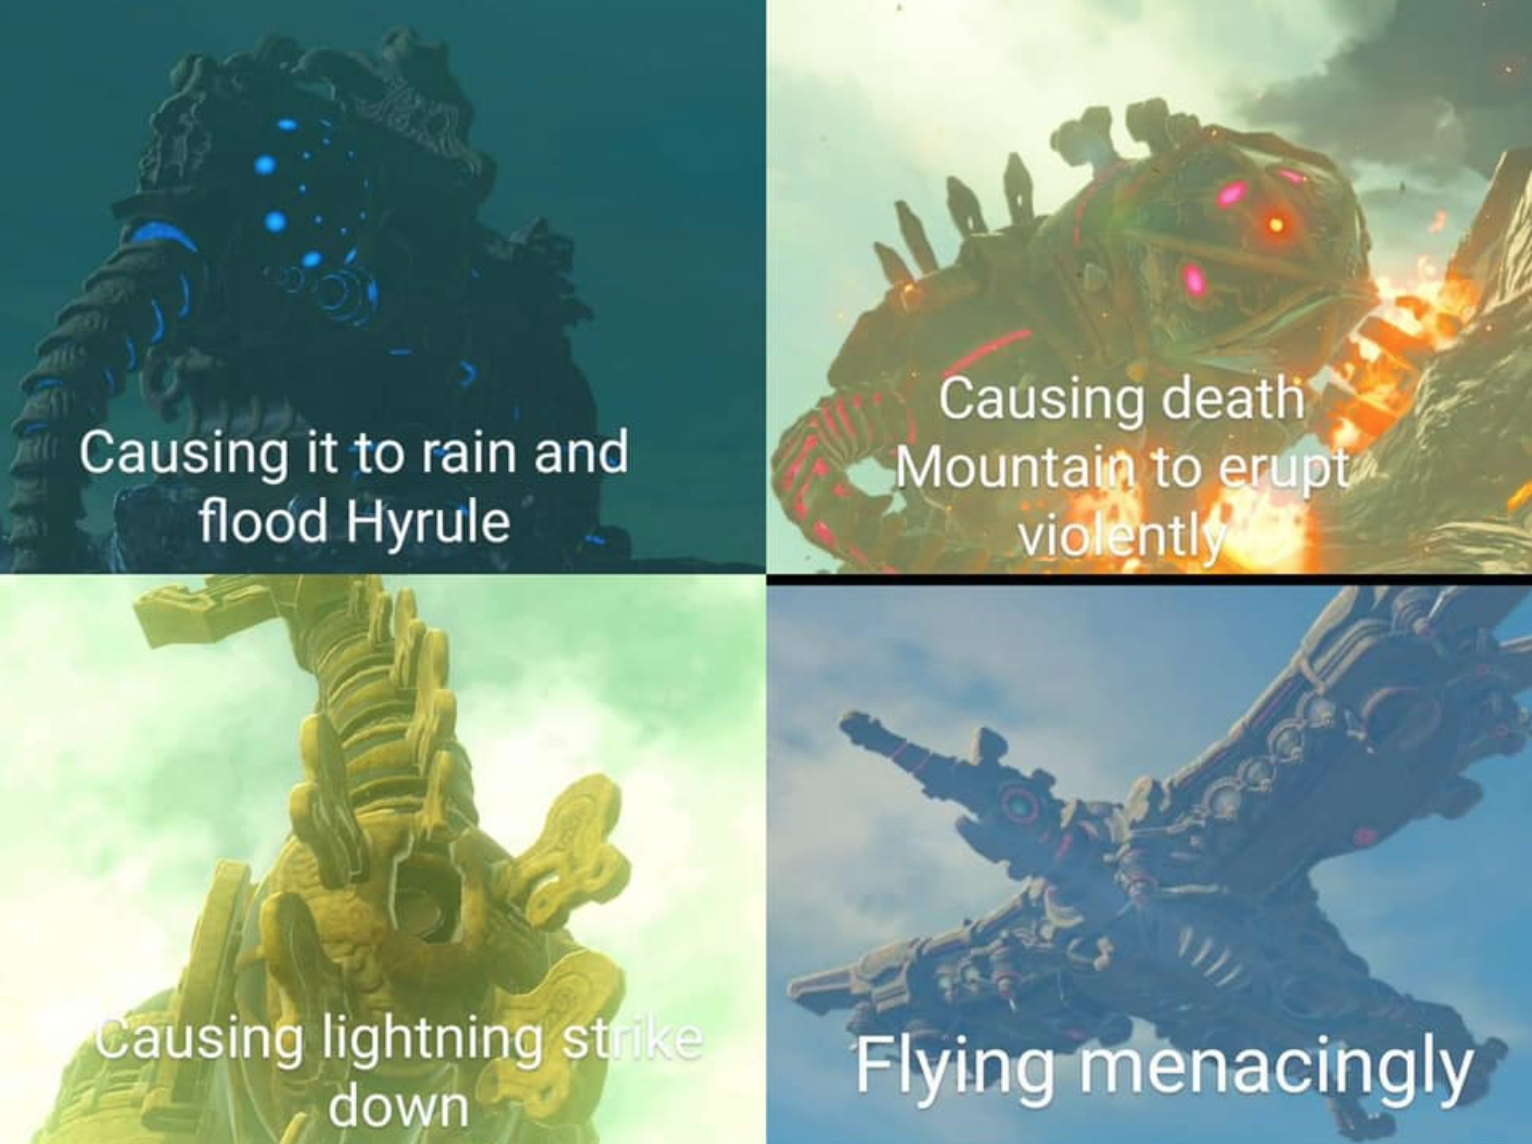 fauna - Causing it to rain and flood Hyrule Causing death Mountain to erupt violently Causing lightning strike down Flying menacingly